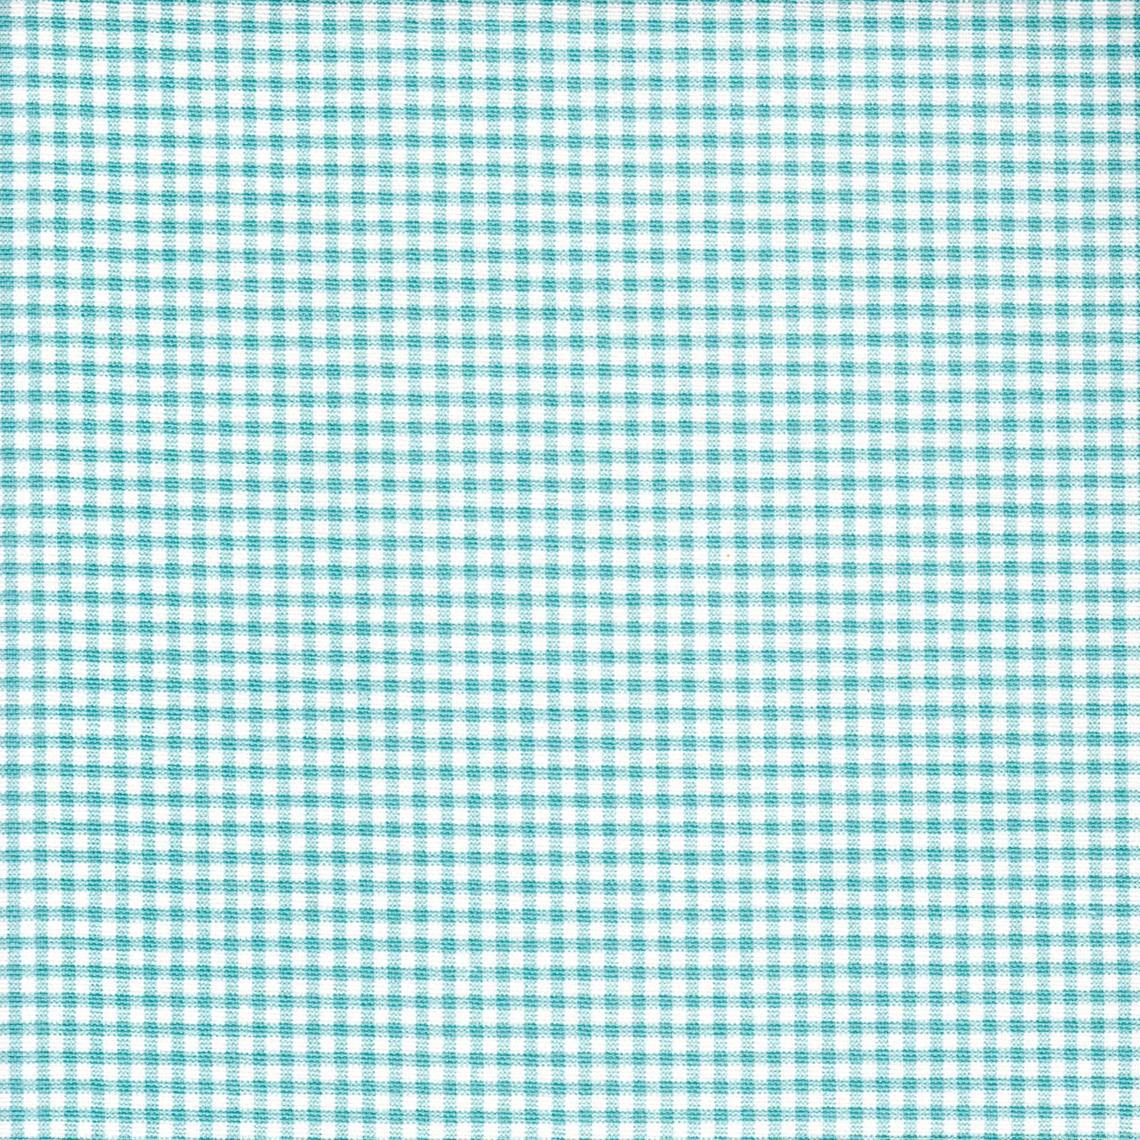 bed scarf in farmhouse turquoise blue gingham check on cream